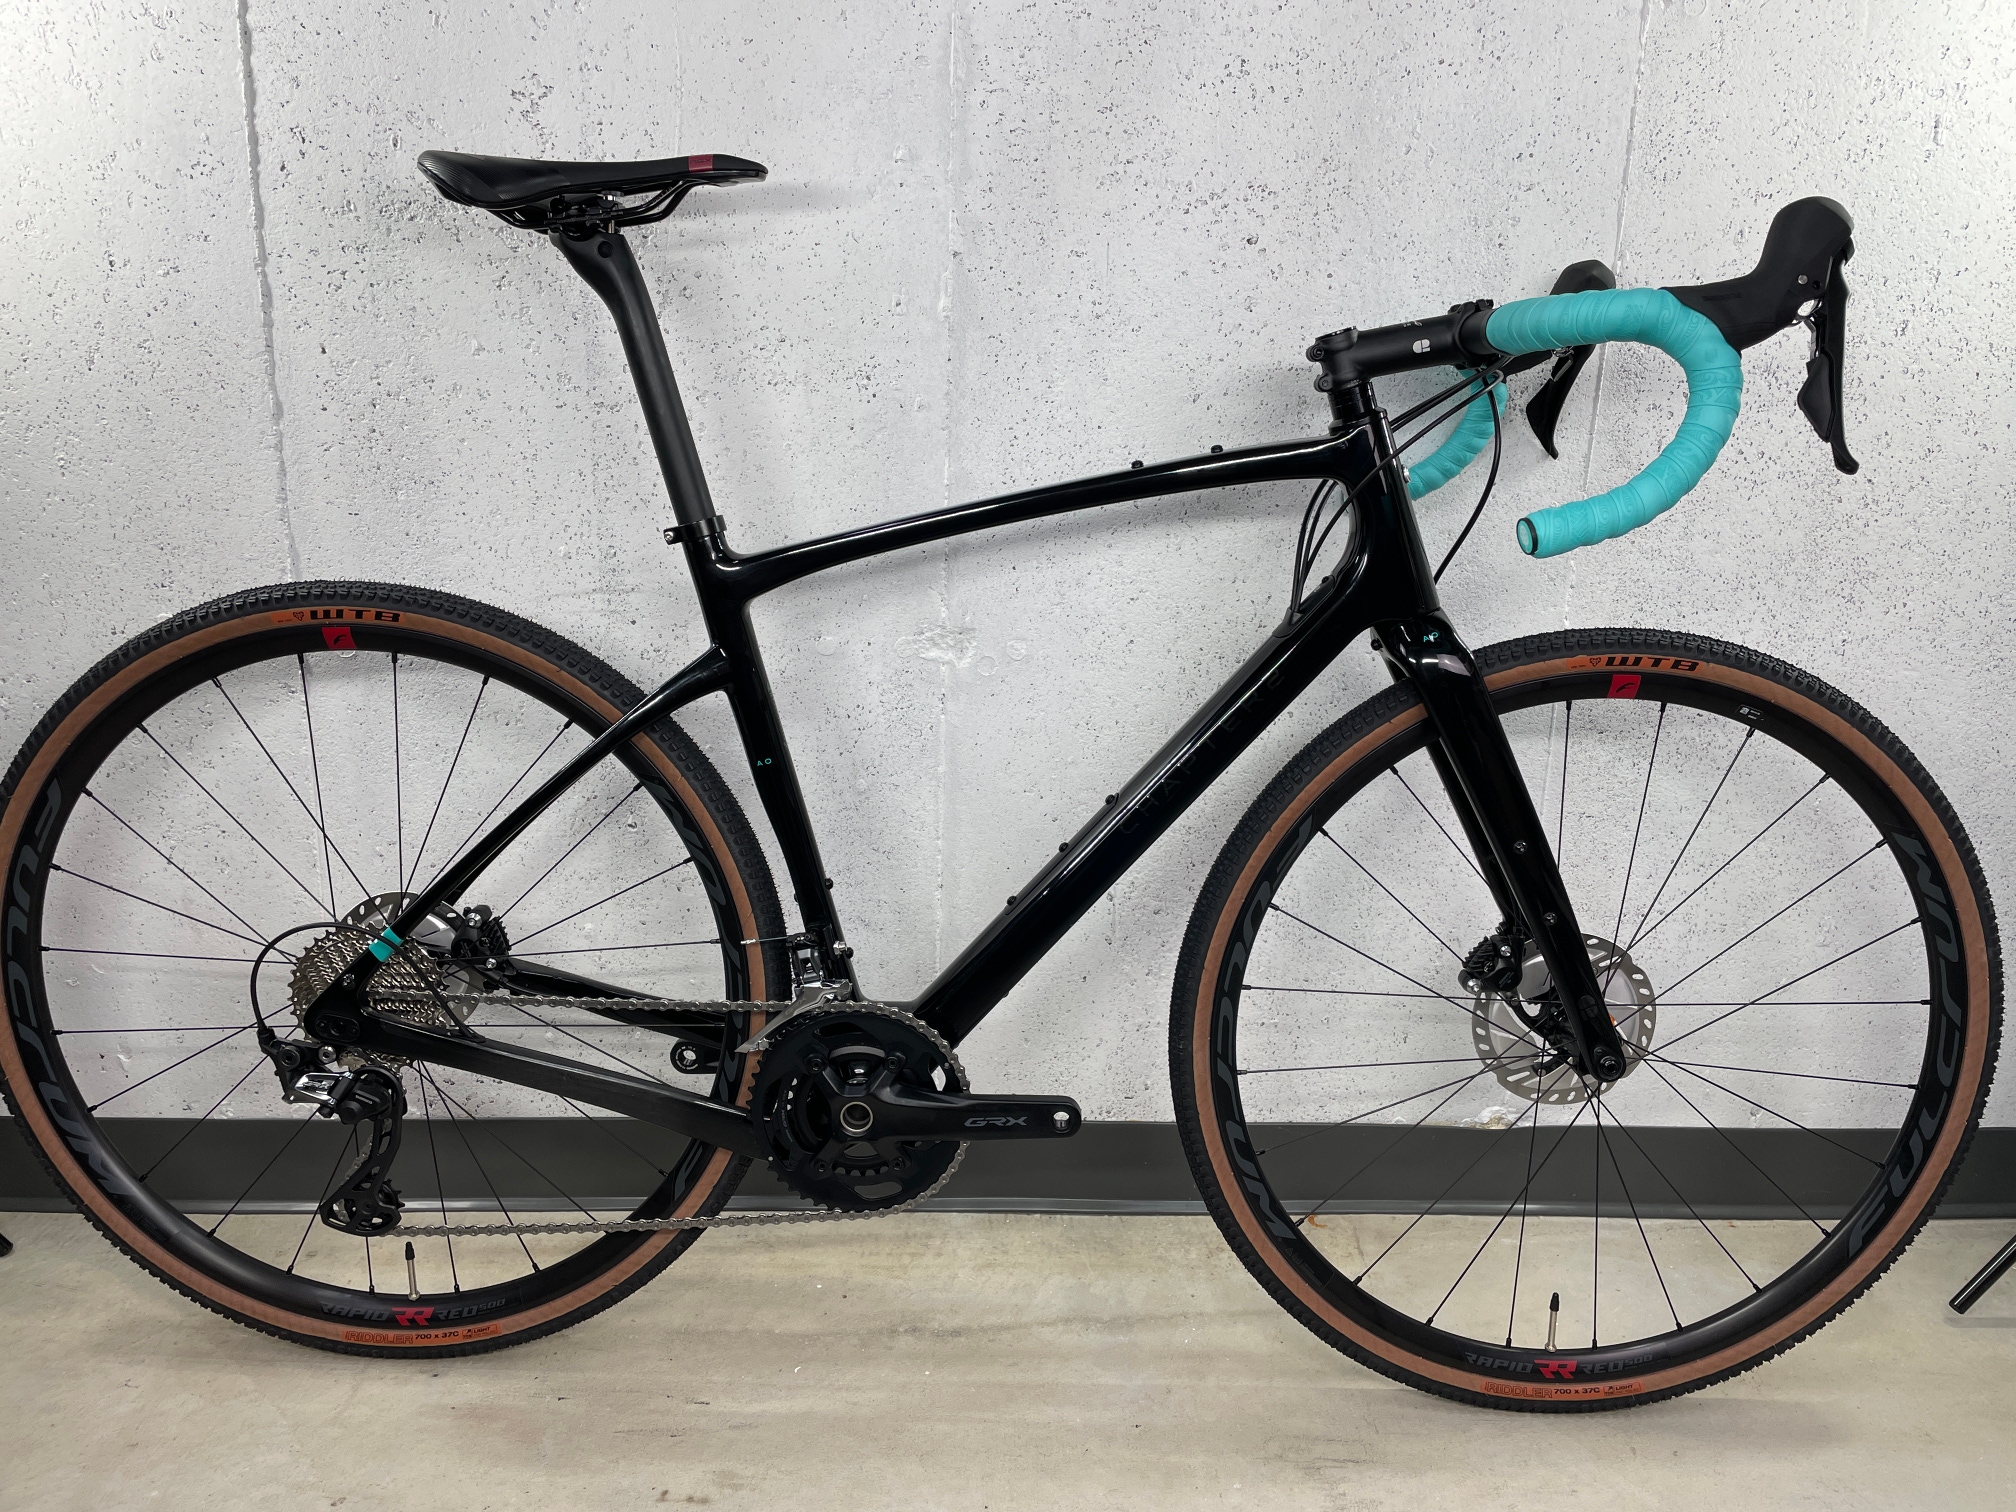 New Chapter2 AO Disc Carbon Gravel Bike with Shimano GRX - Medium